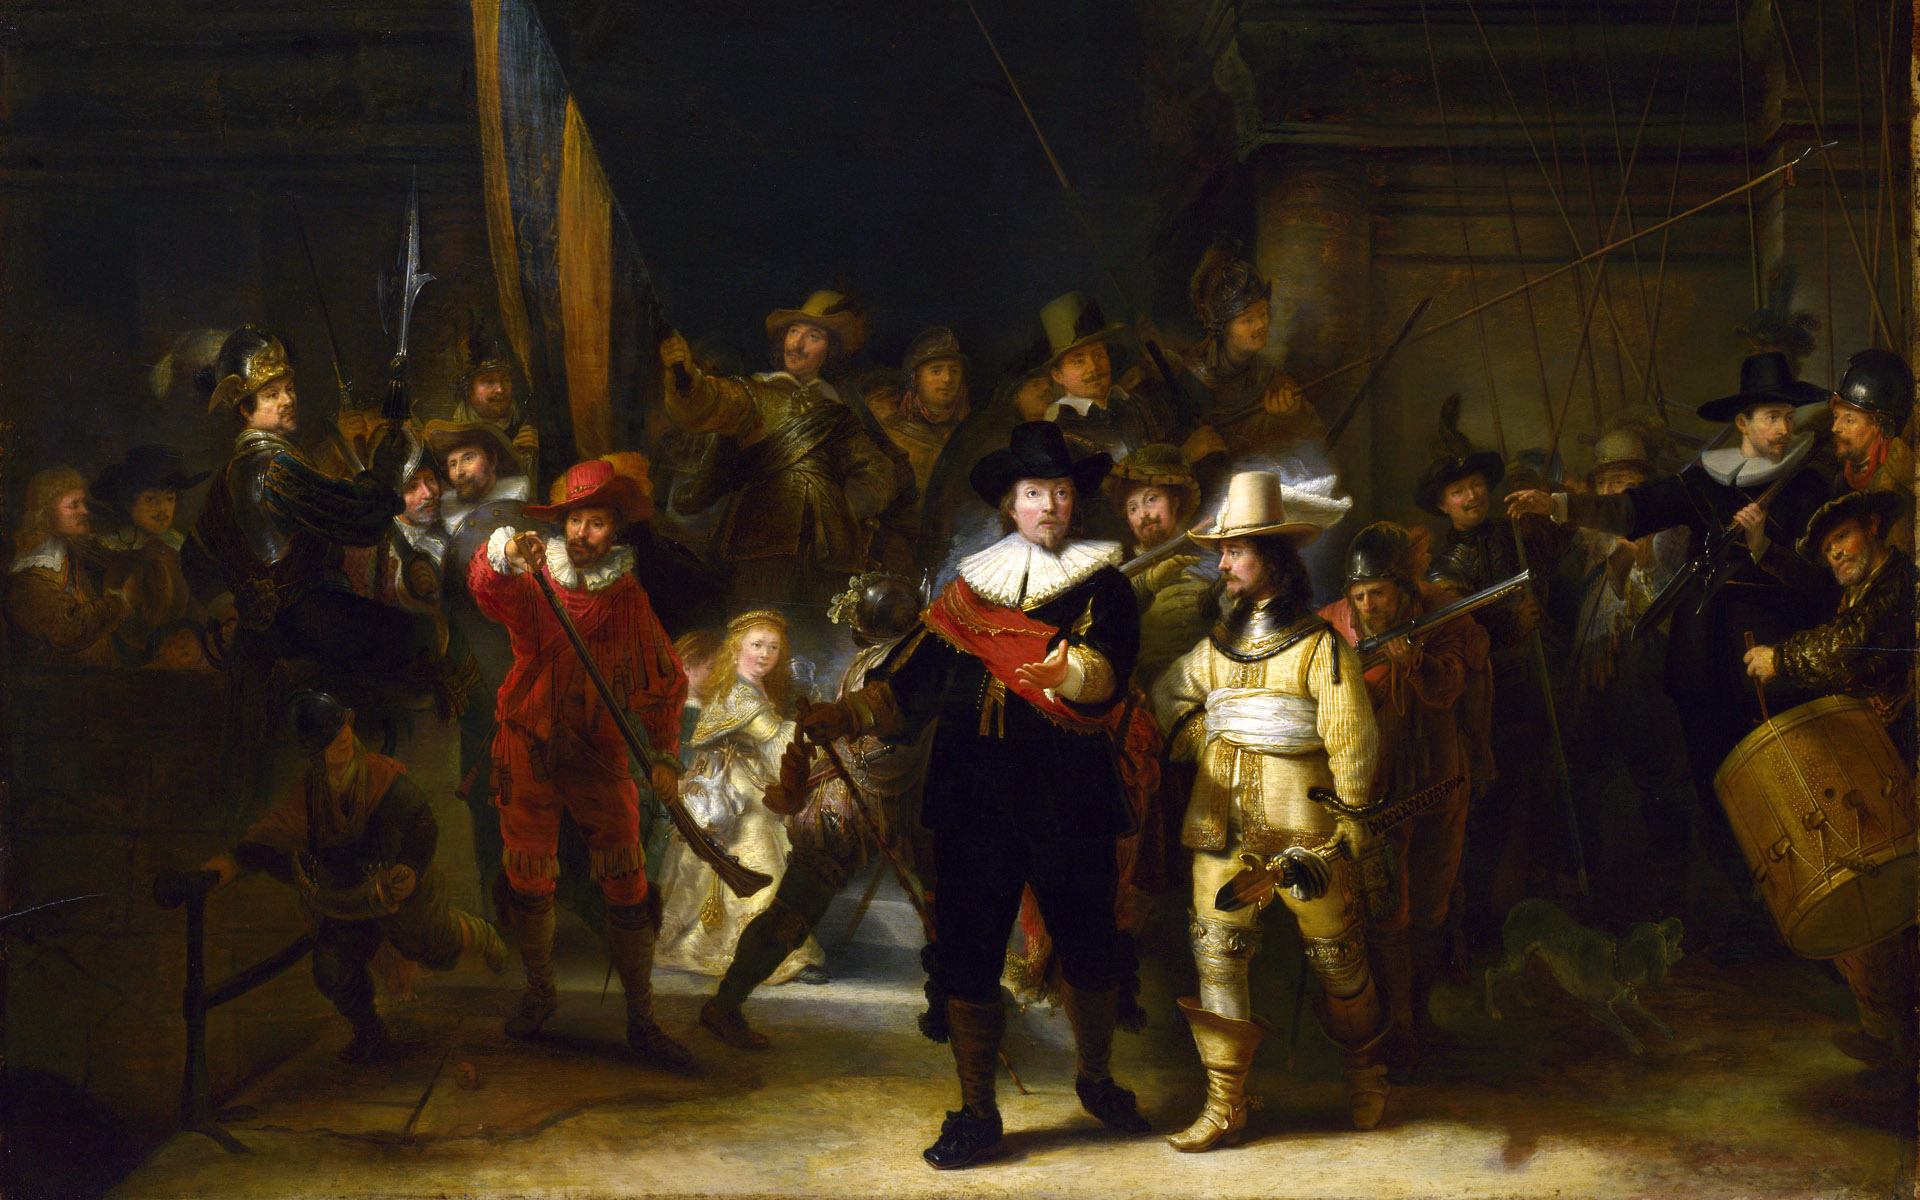 Full title: The Company of Captain Banning Cocq ('The Nightwatch') Artist: Gerrit Lundens (after Rembrandt) Date made: after 1642 Source: http://www.nationalgalleryimages.co.uk/ Contact: picture.library@nationalgallery.co.uk Copyright (C) The National Gallery, London